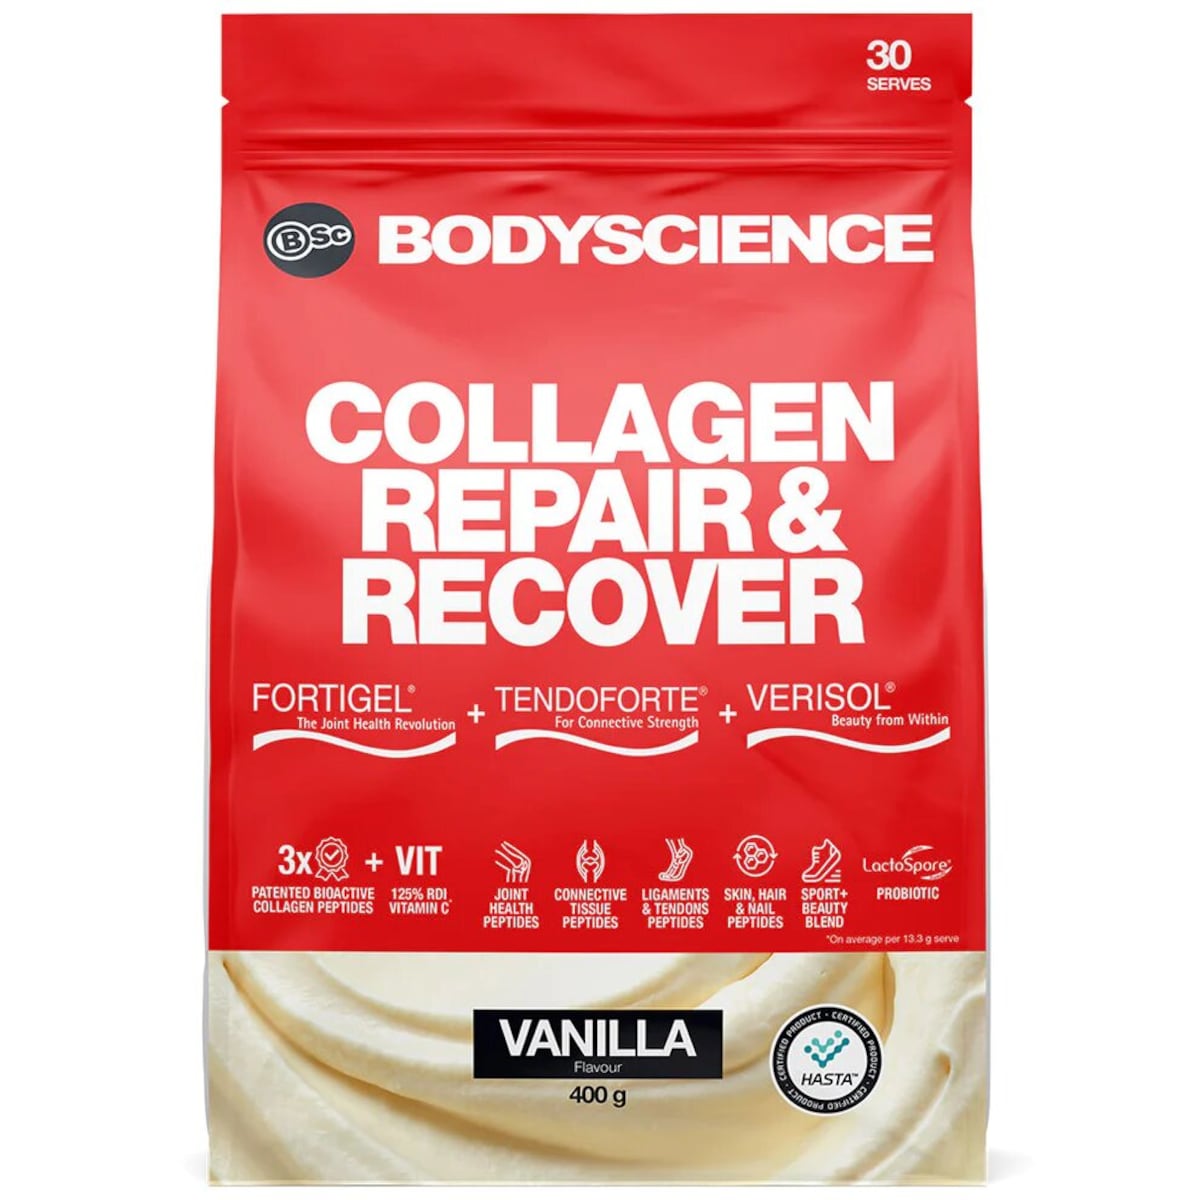 BSc Body Science Collagen Repair and Recover Vanilla 400g Australia